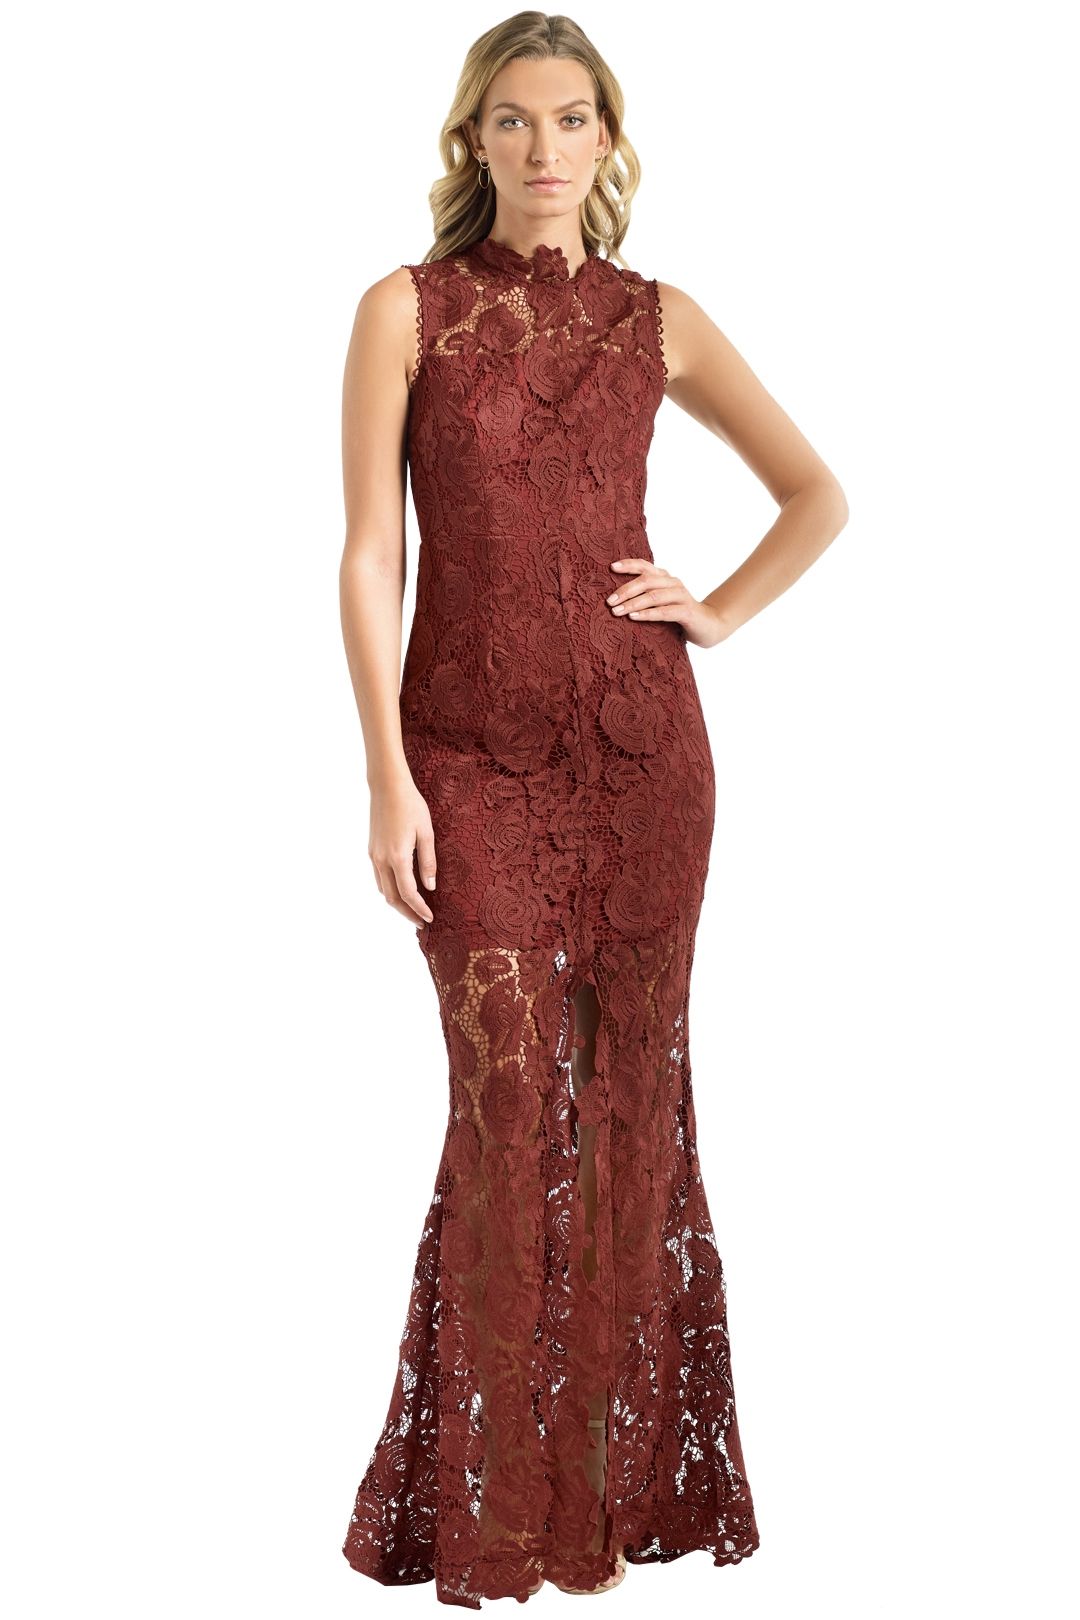 Grace and Hart - Espresso Gown - Red - Front